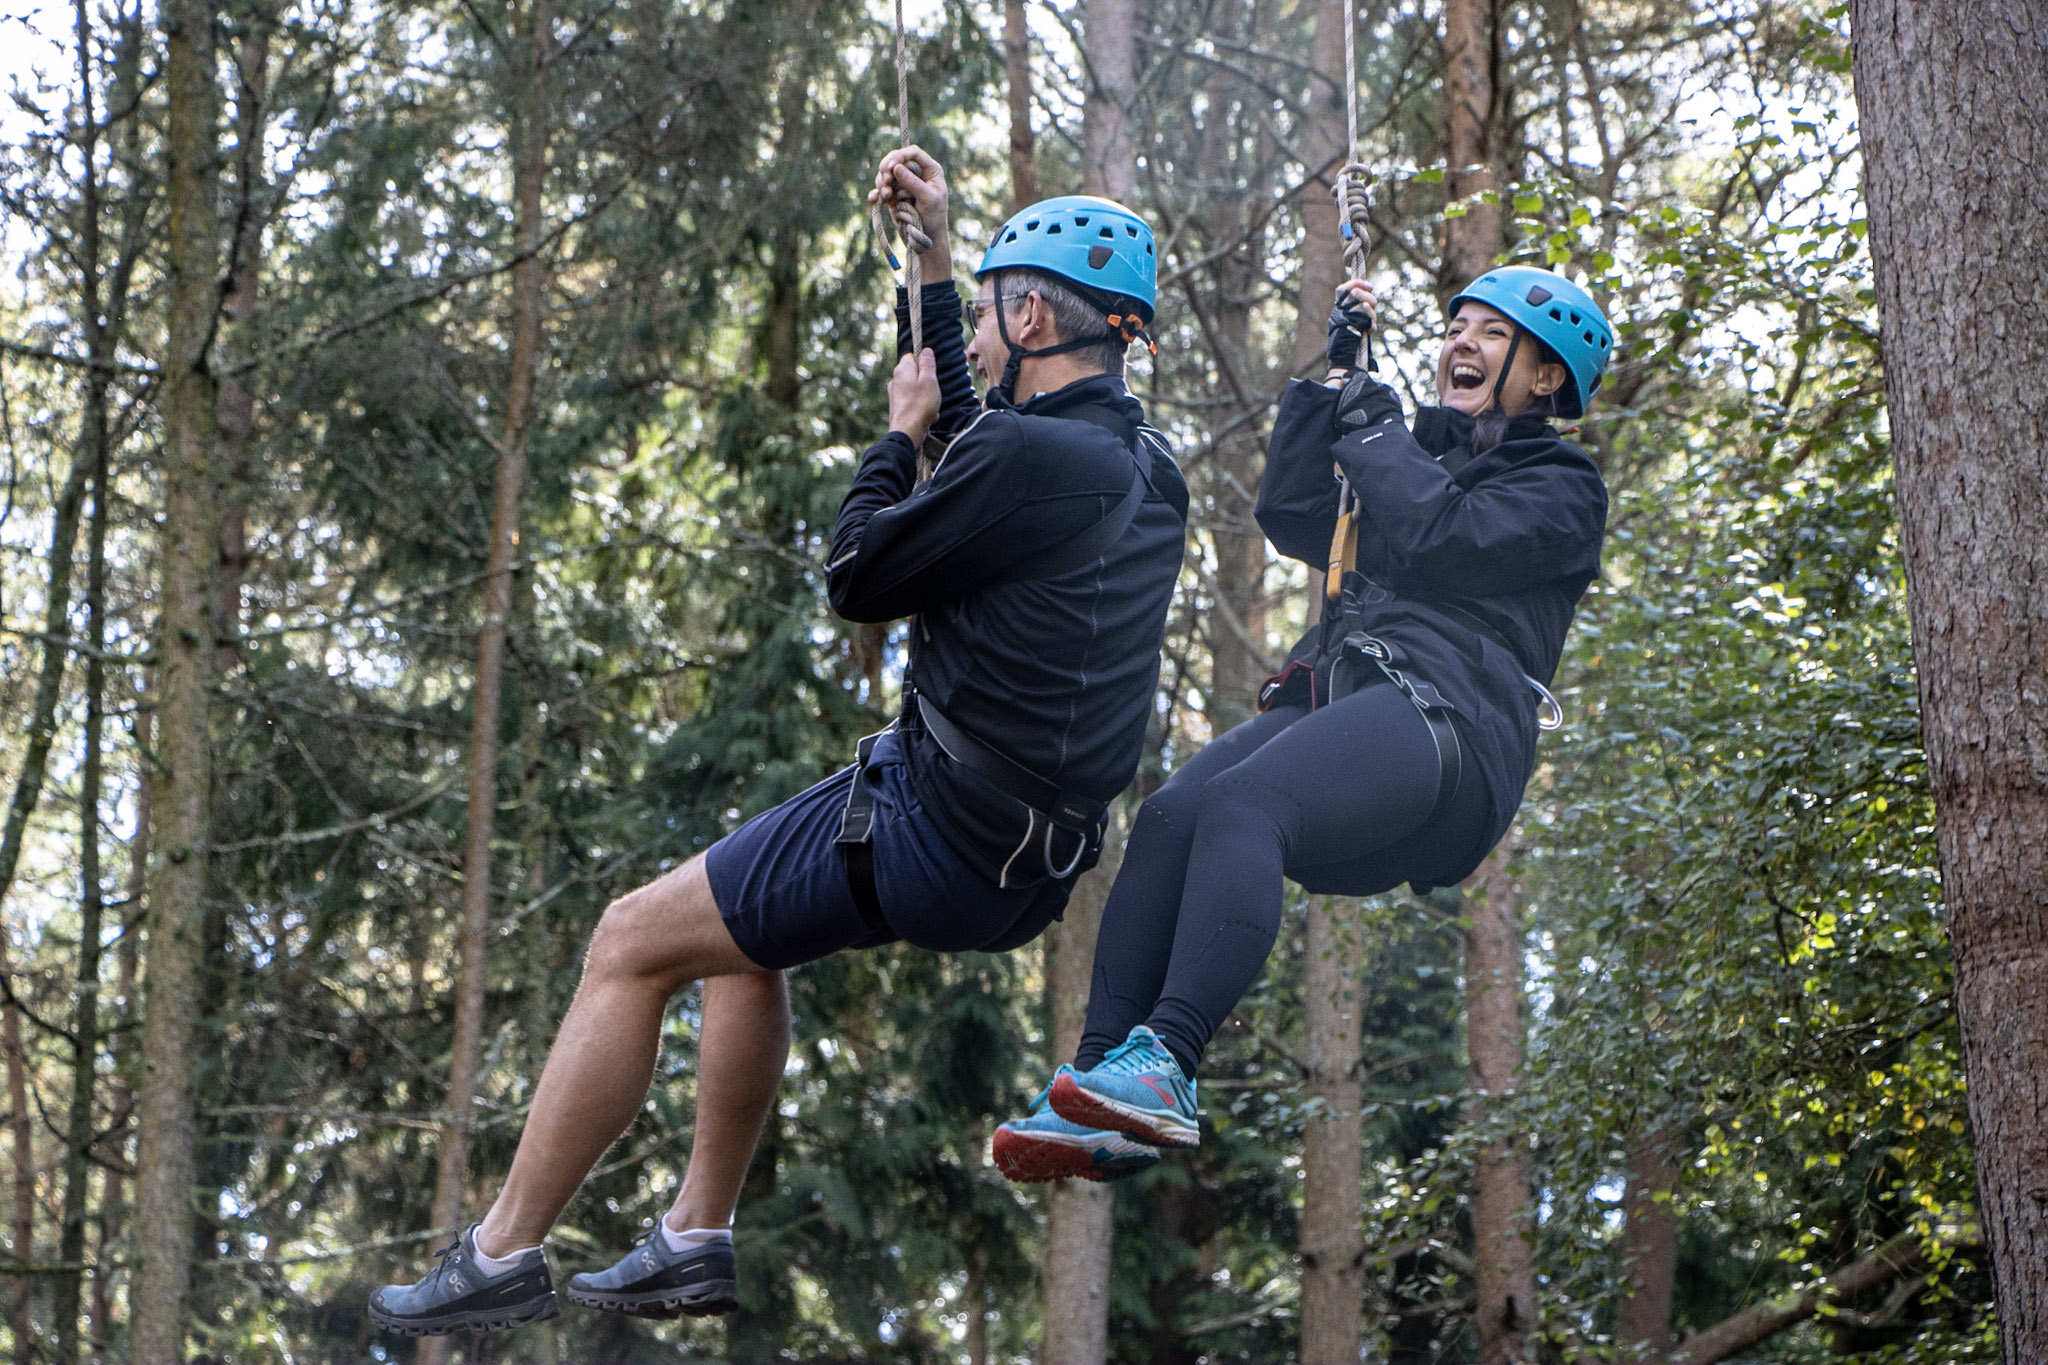 A couple of workmates enjoying high ropes as part of their Christmas office party